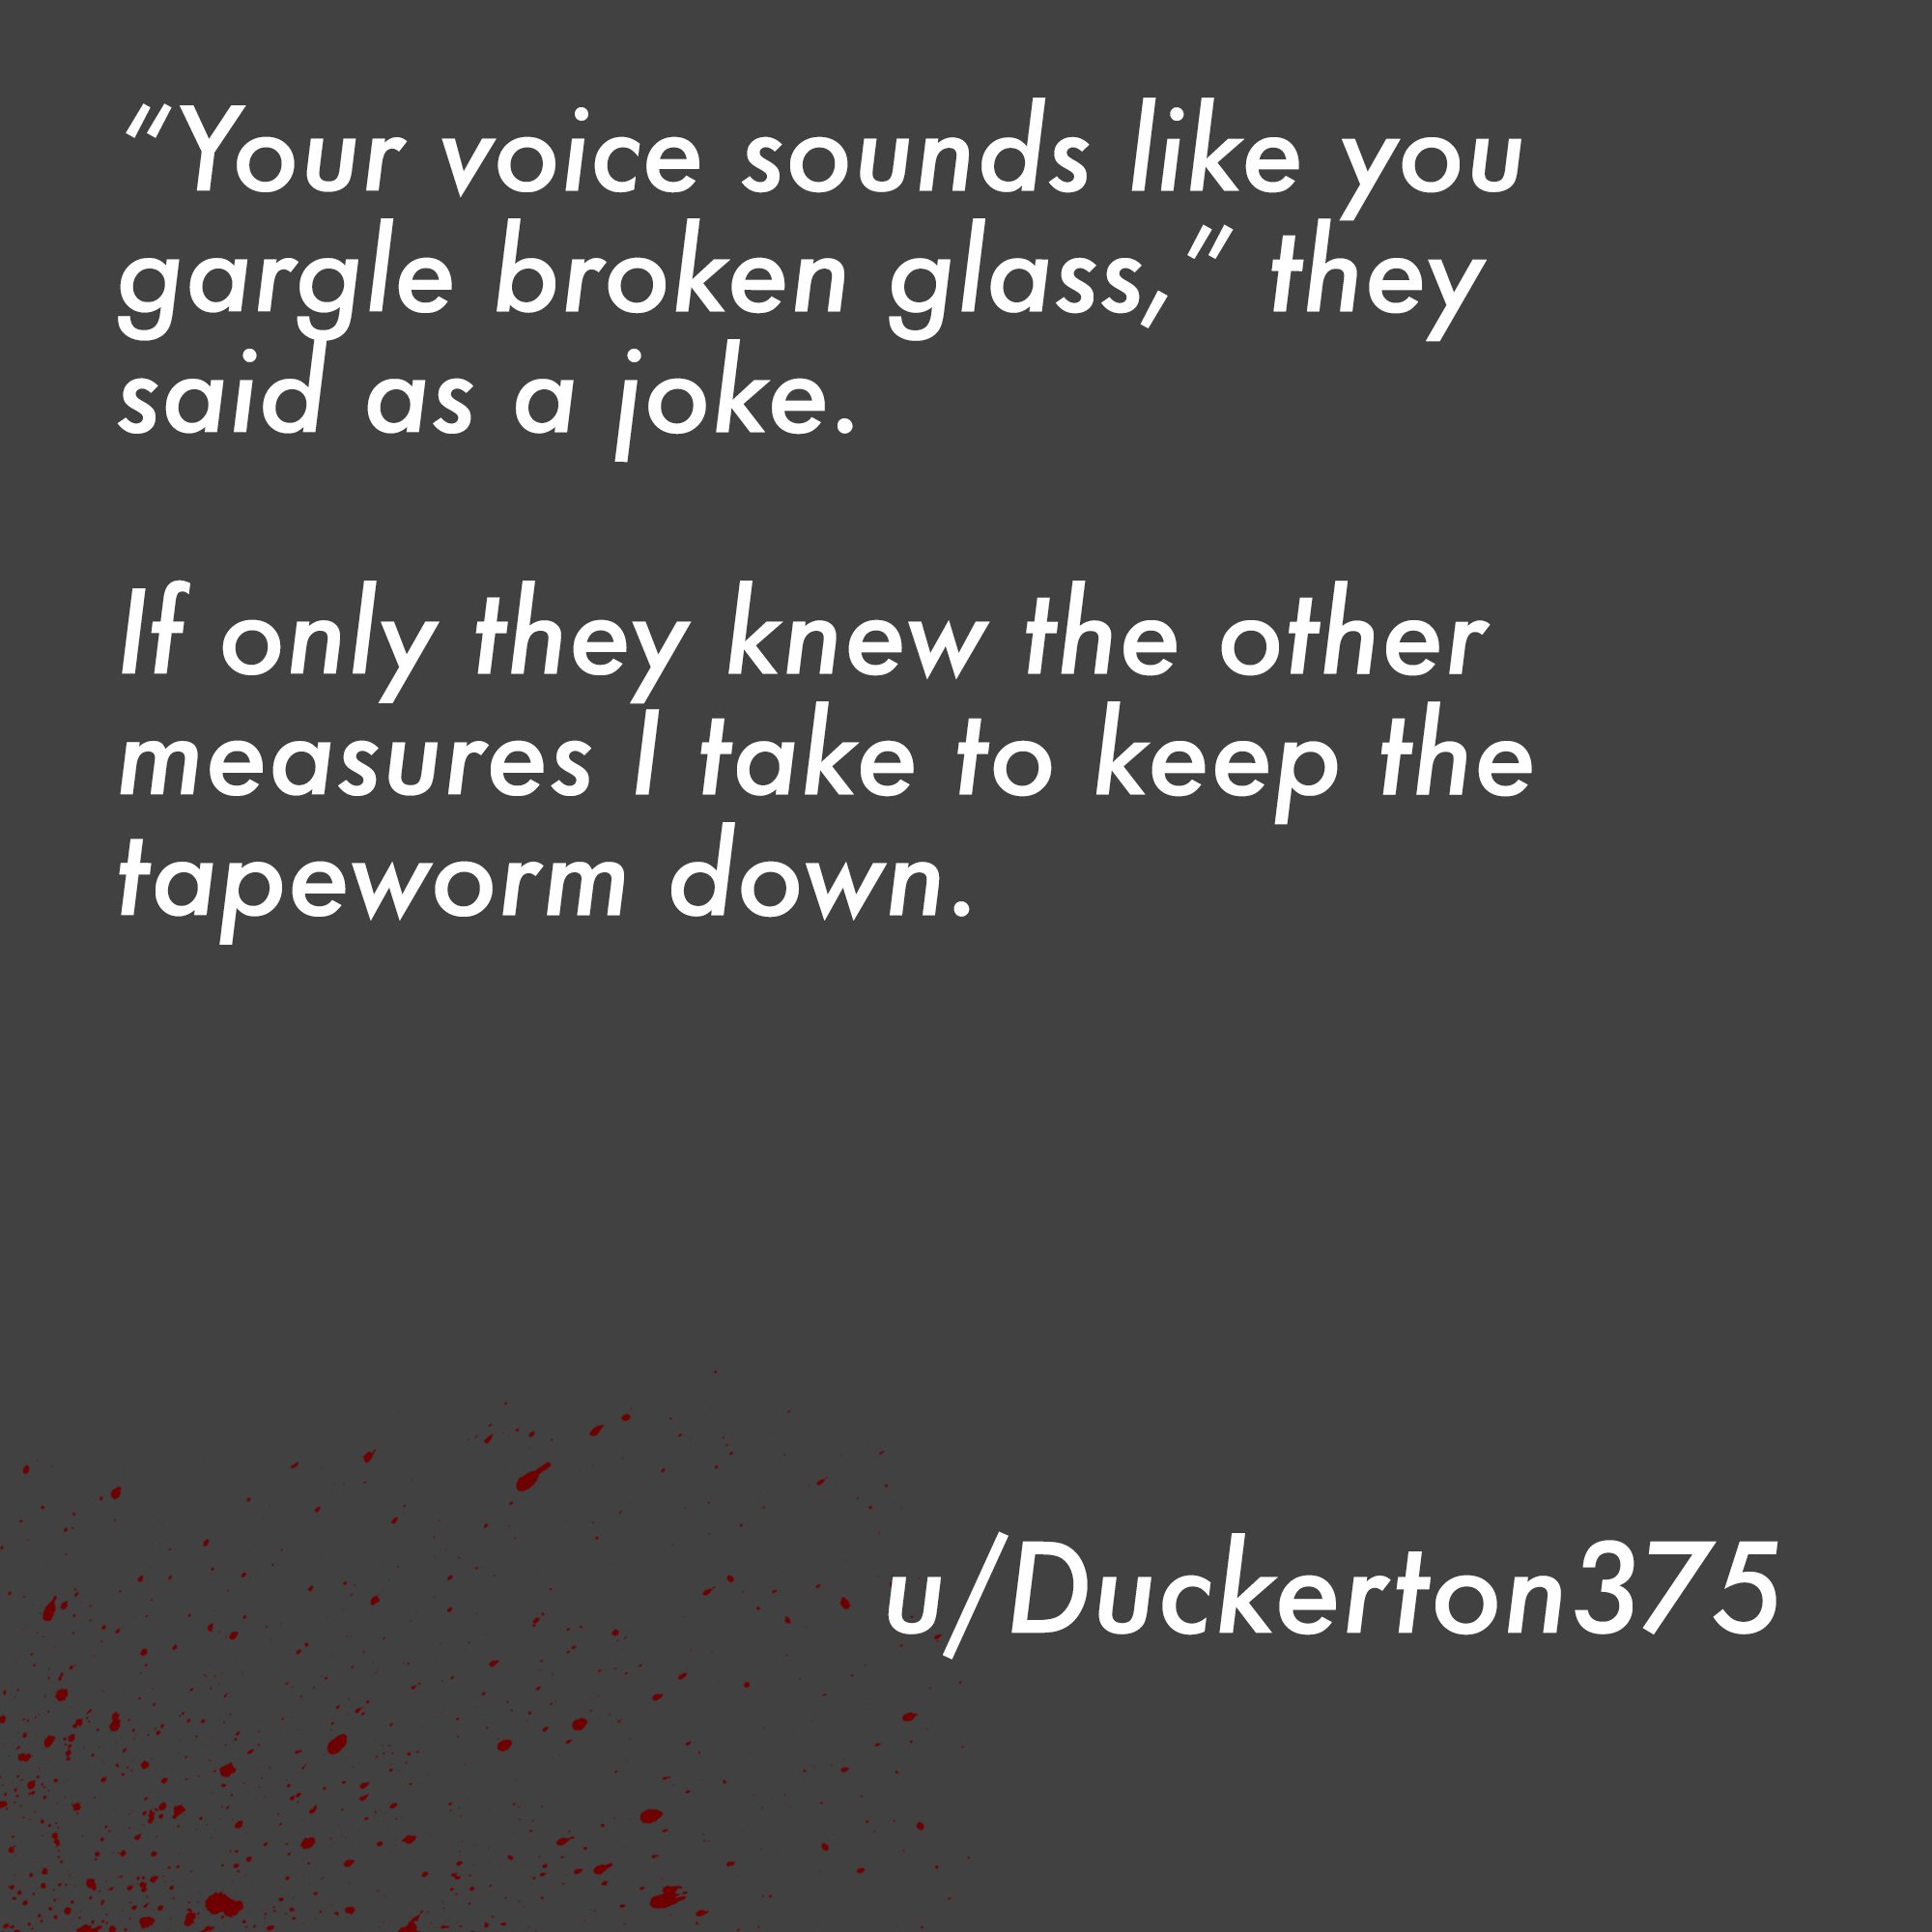 two line horror stories - ayrılık aşk resimleri - "Your voice sounds you gargle broken glass," they said as a joke. If only they knew the other measures I take to keep the tapeworm down. uDuckerton375